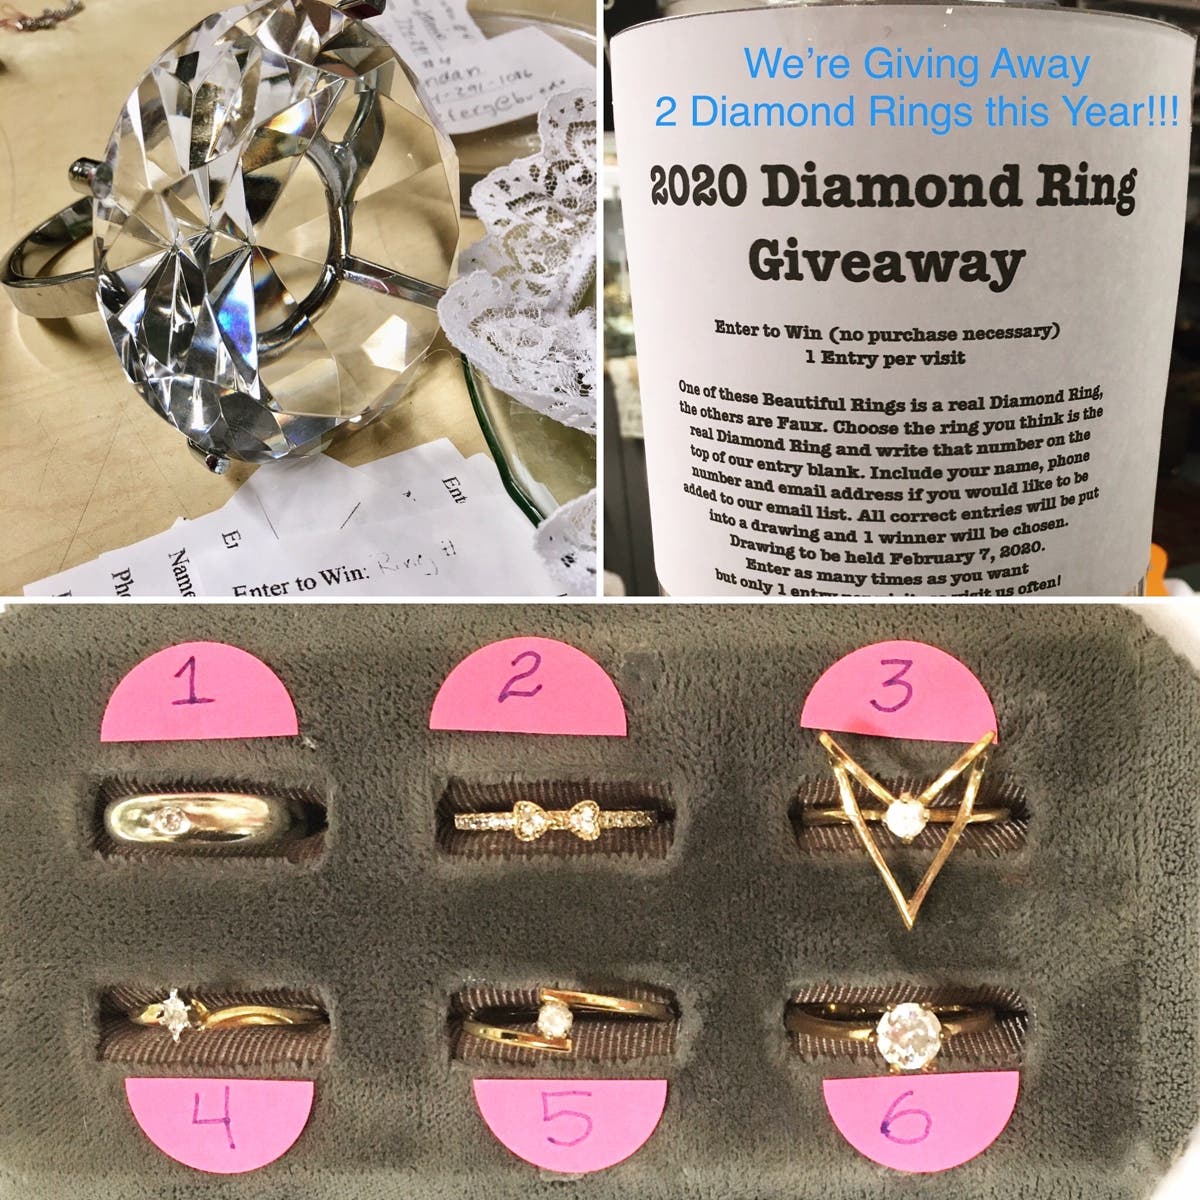 Gallery 2 Antiques Market 2020 Diamond Rings Giveaway